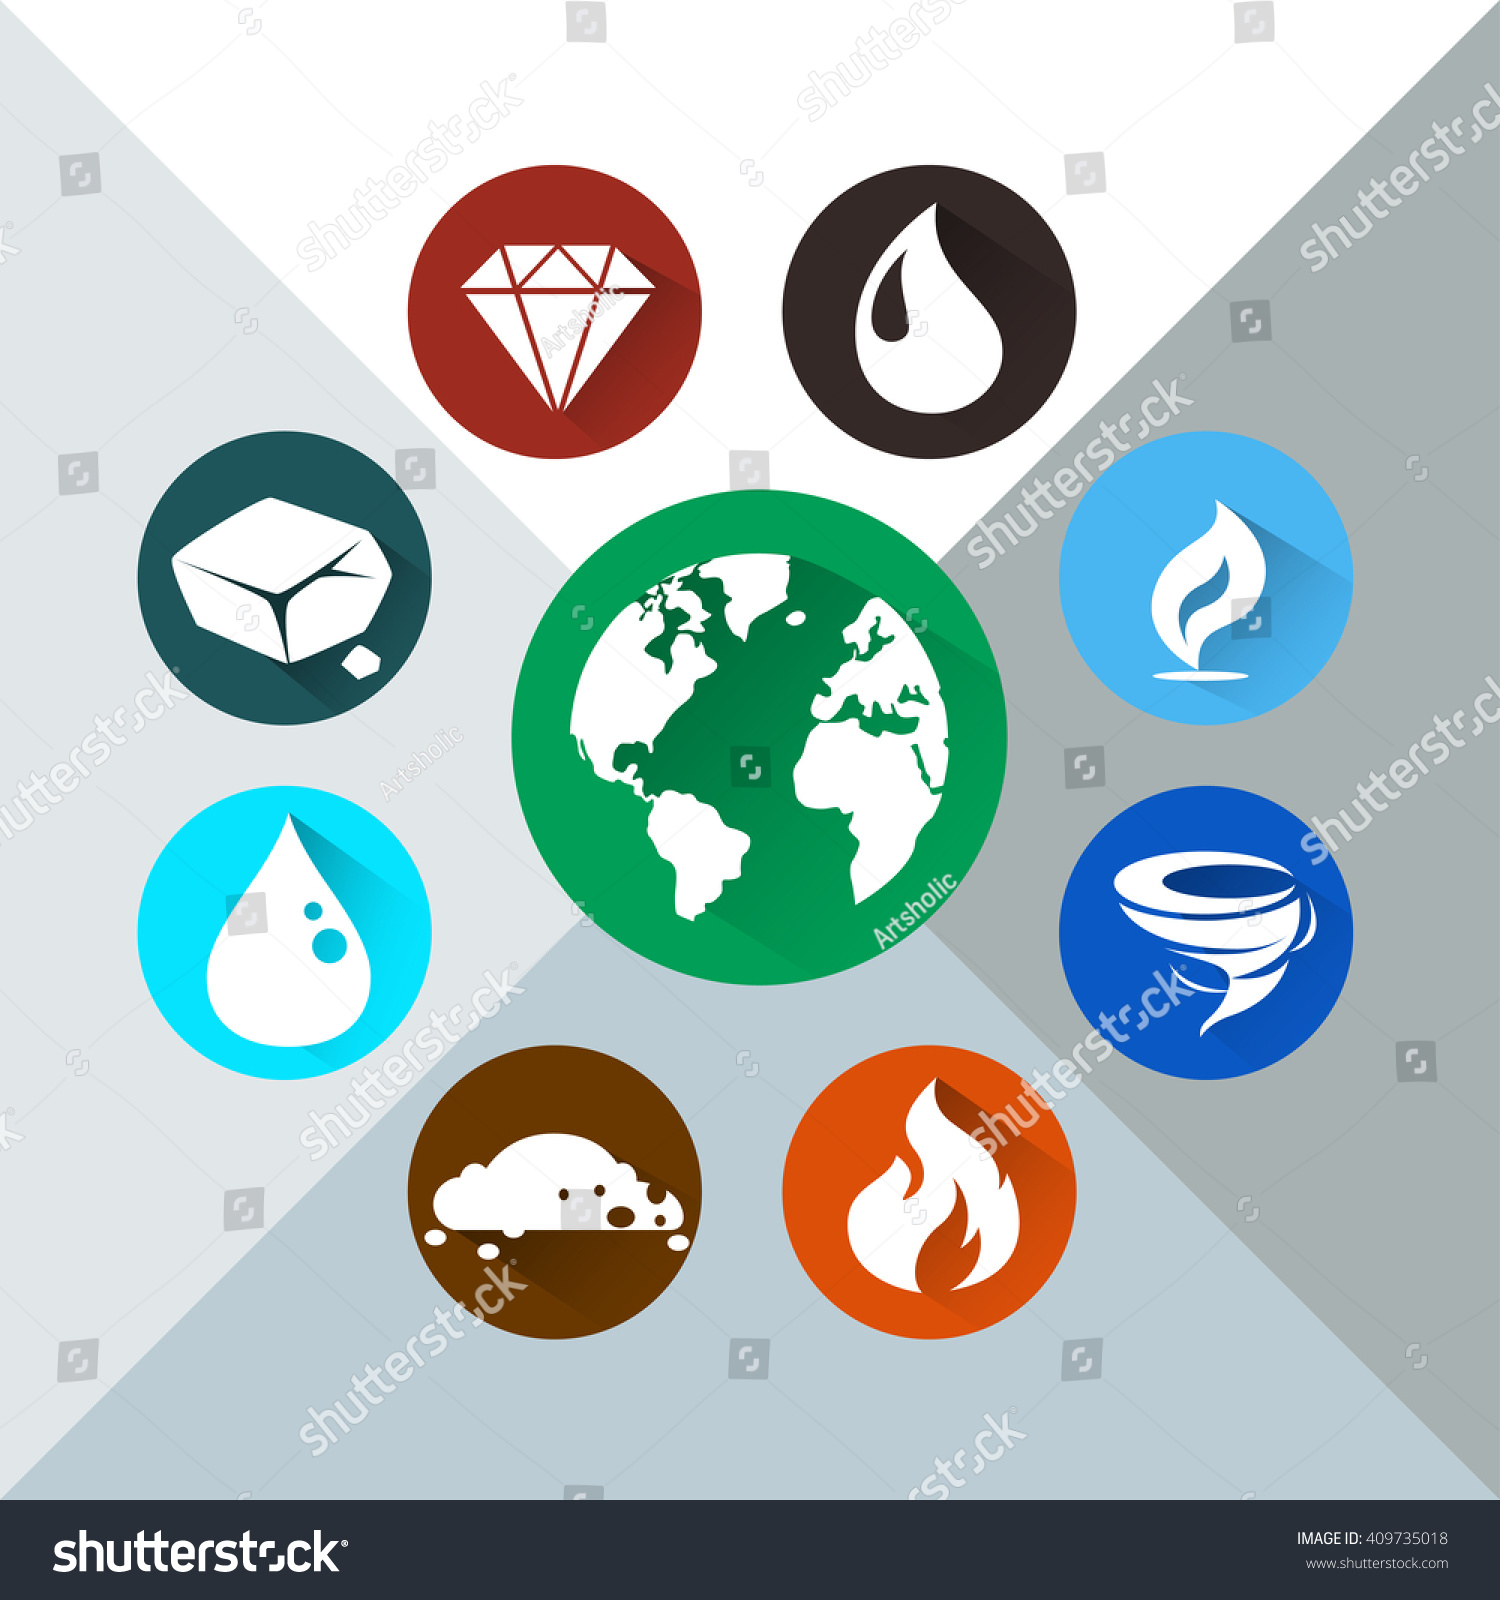 Icons Elements Earth Water Air Fire Stock Vector - Illustration of 